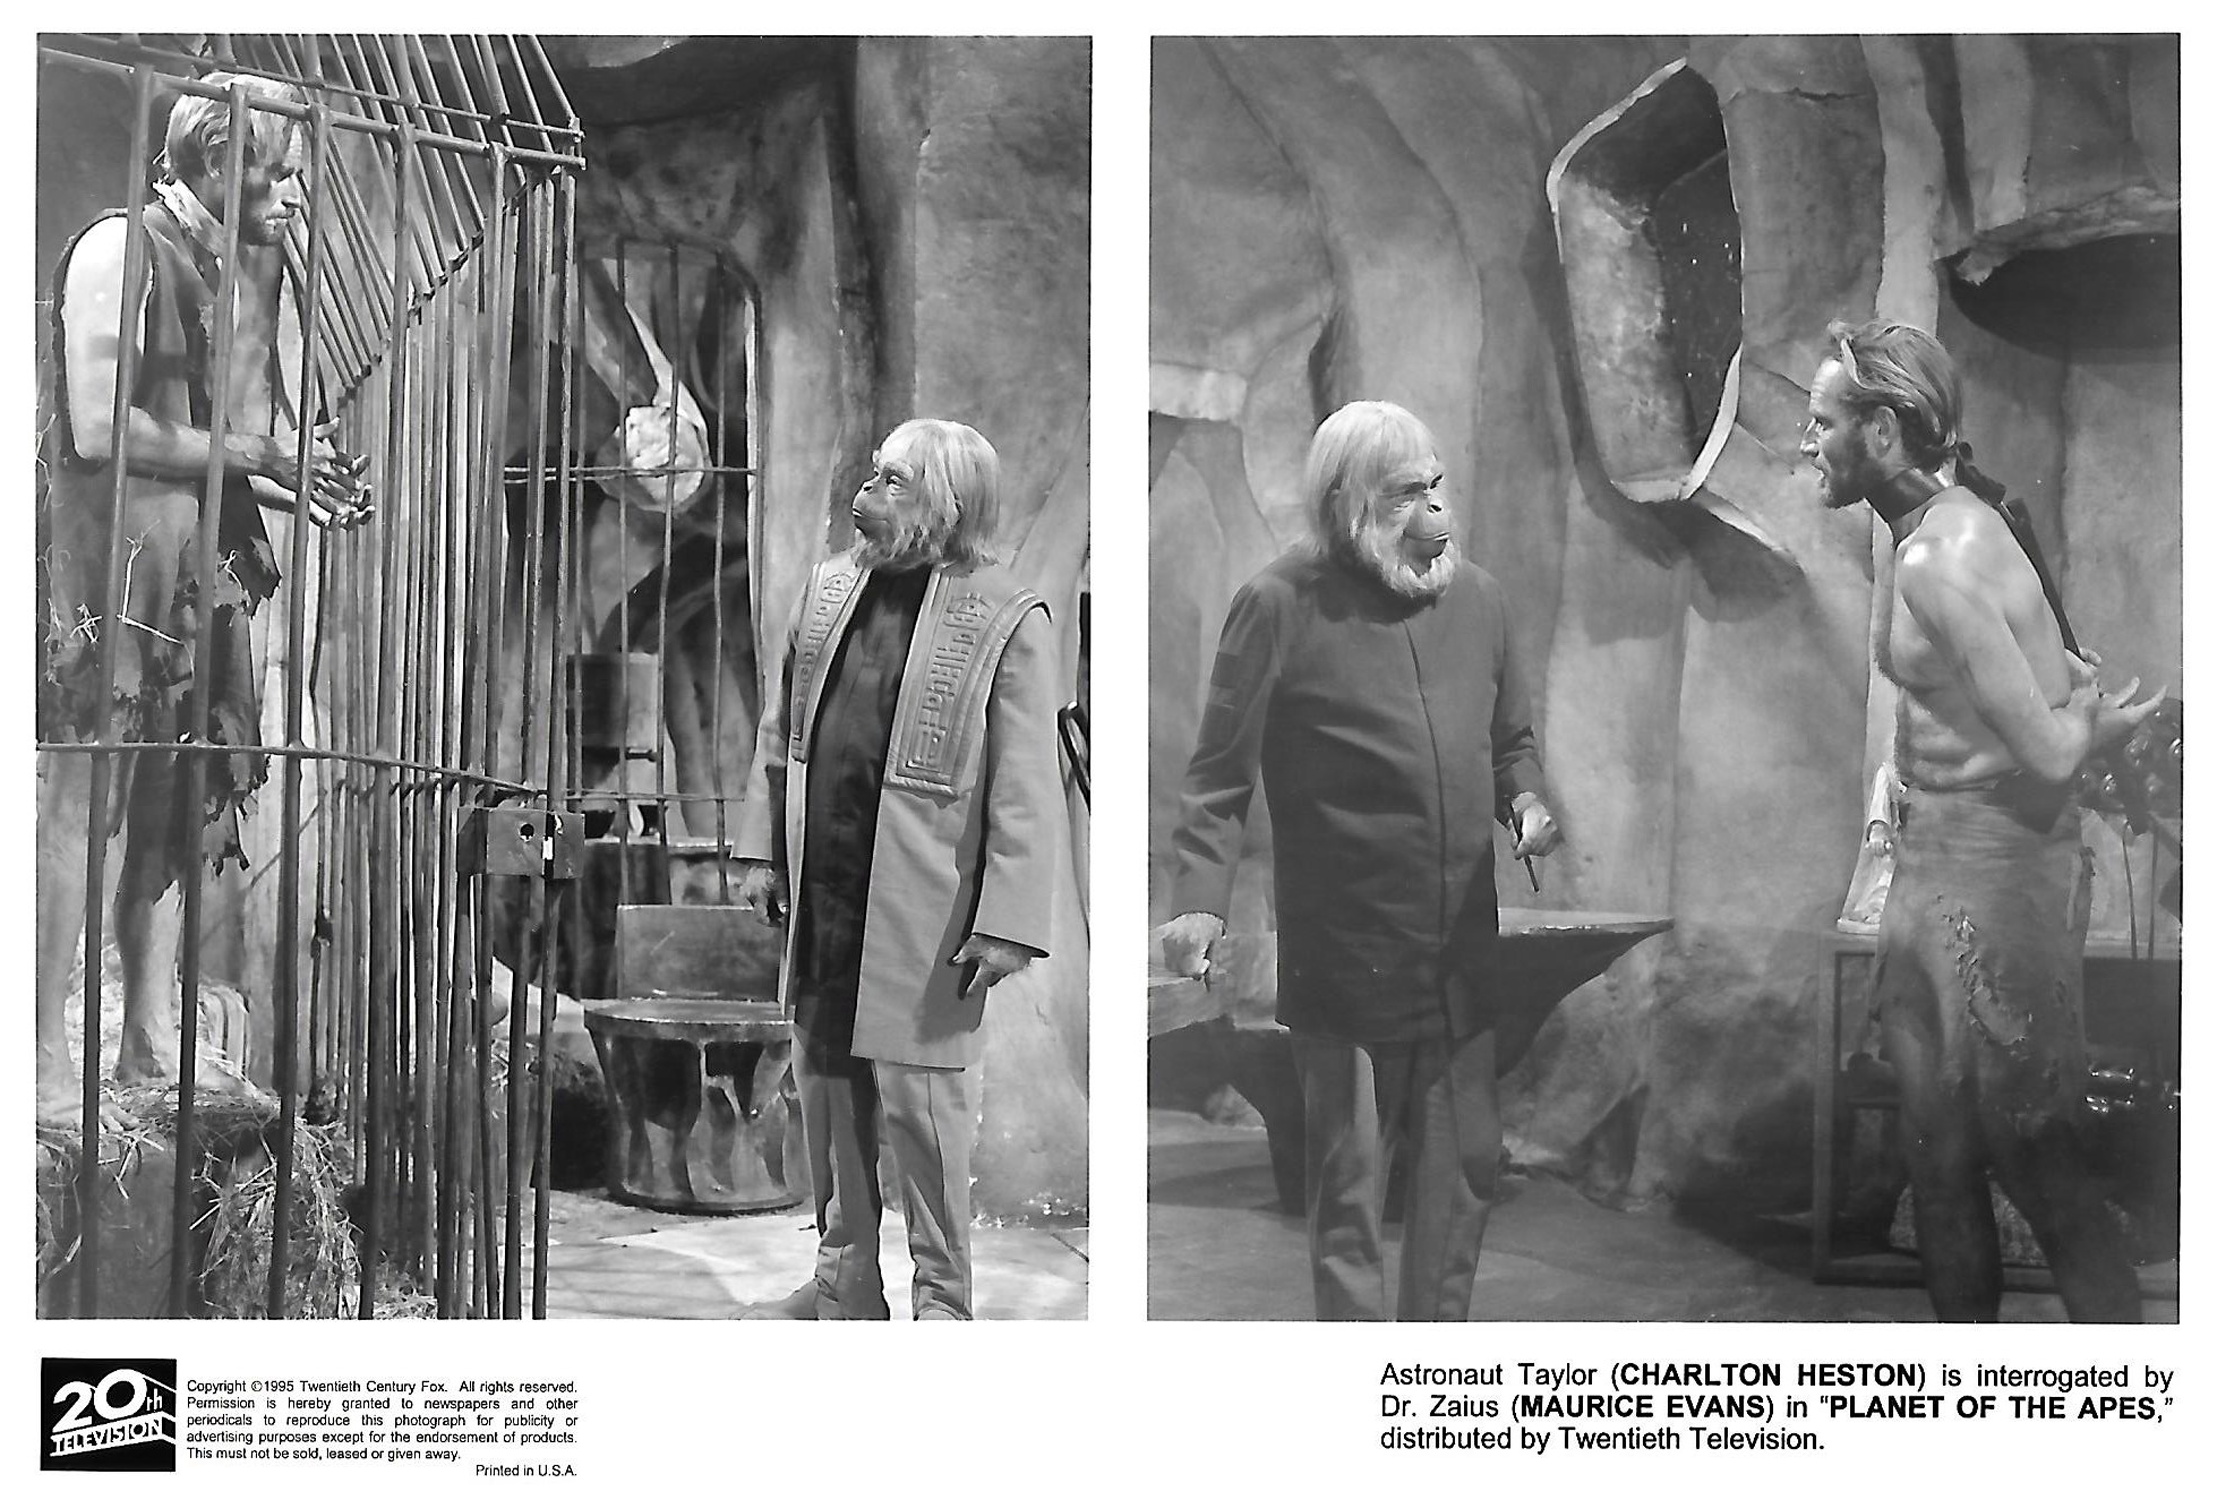  Astronaut George Taylor (Heston) is interrogated by Dr. Zaius (Maurice Evans), who knows more than he can say about the secrets of the planet’s past. 